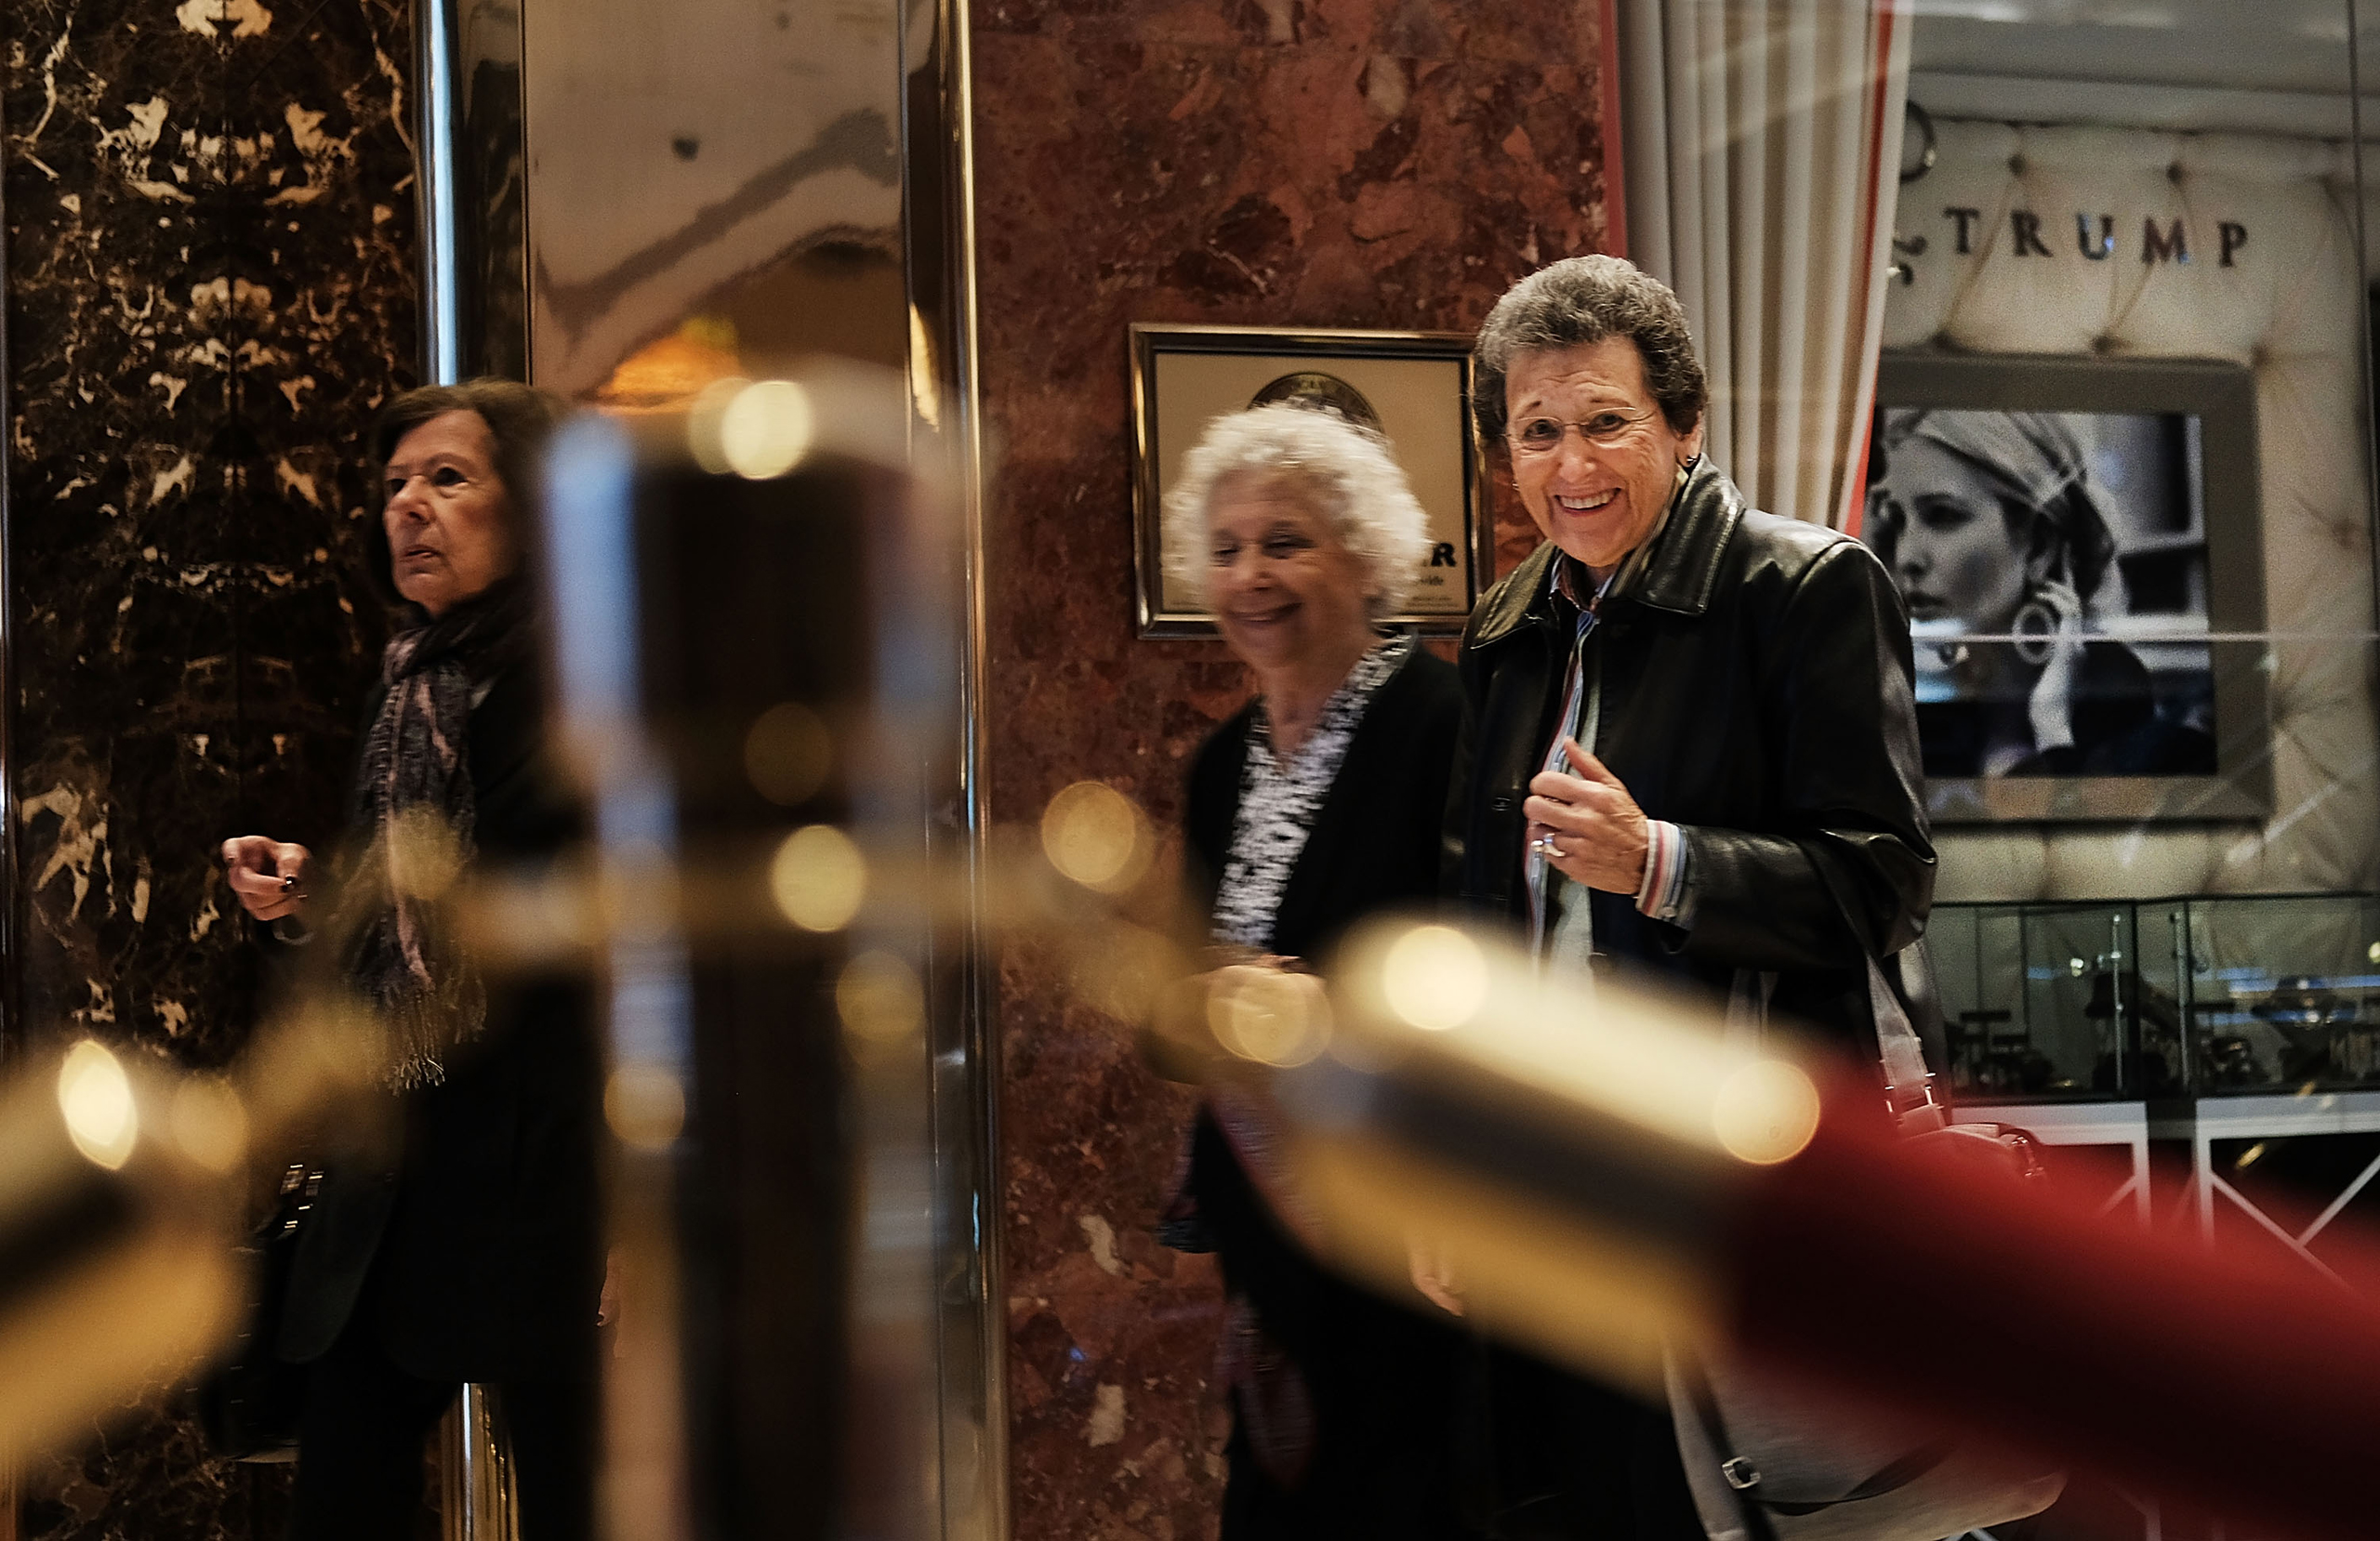 People walk through the lobby of Trump Tower as the media congregates in the lobby on Nov. 18, 2016.